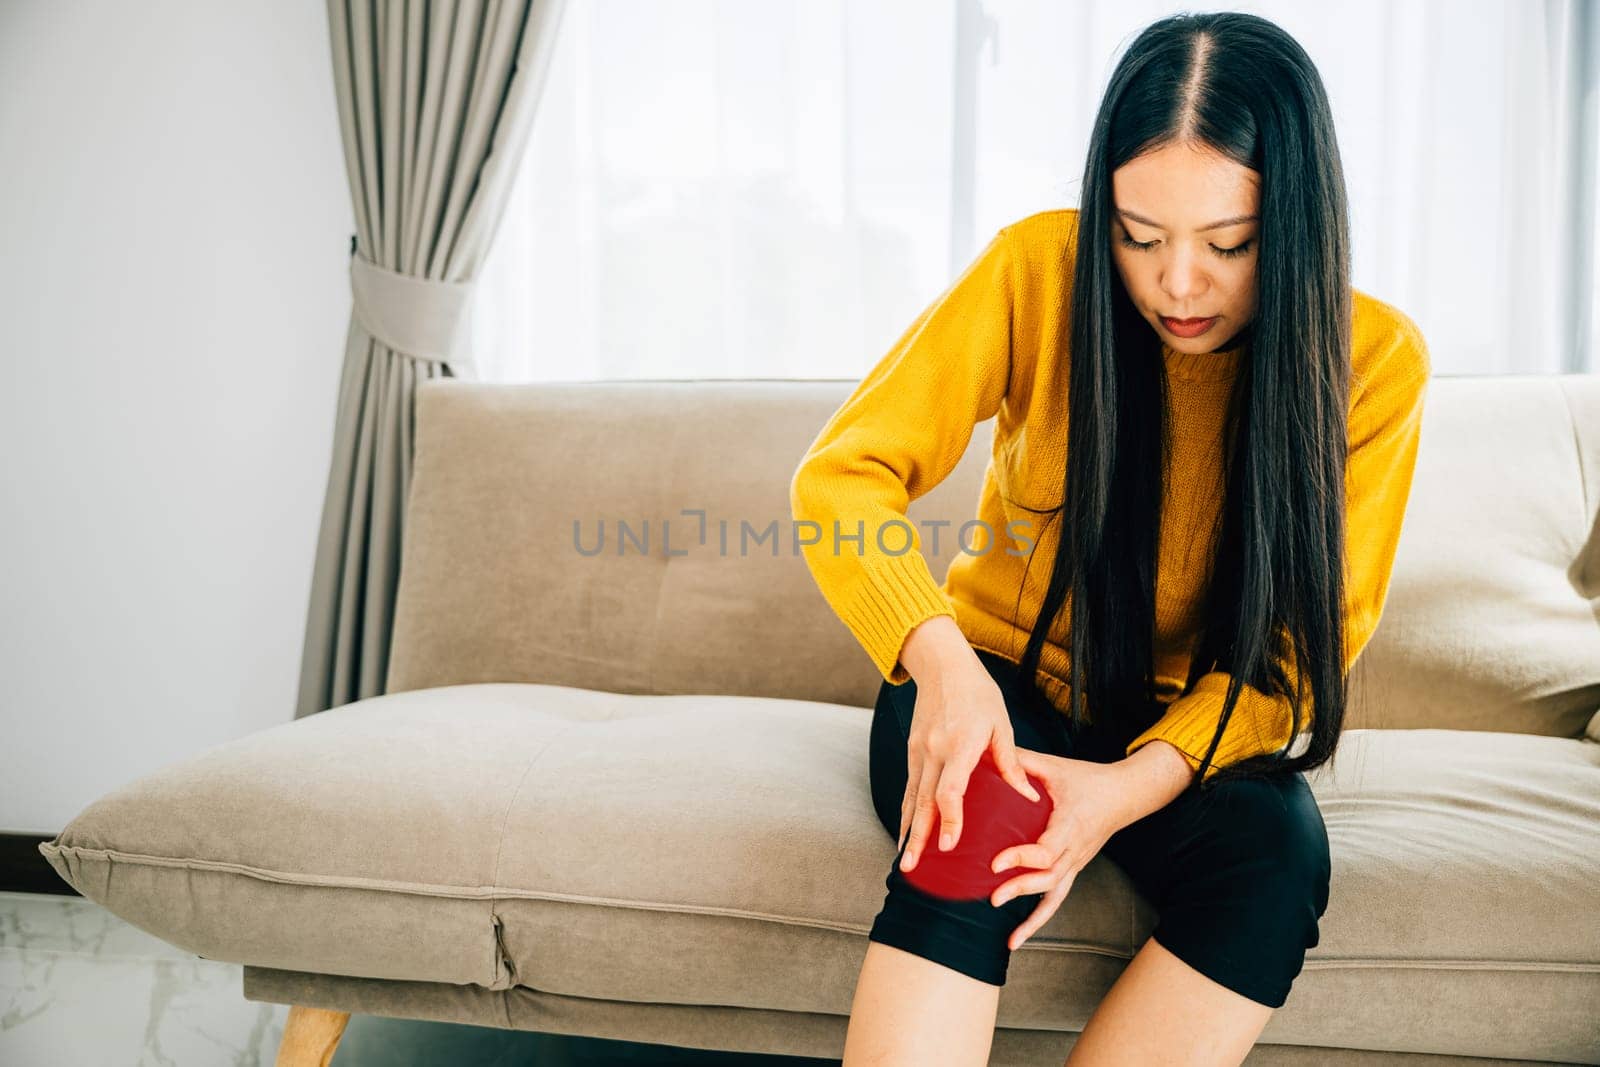 Close-up of a woman on sofa holding her painful knee indicating chronic tendon arthritis. Depicting Health Care and Medical Concept emphasizing tendon inflammation and pain.